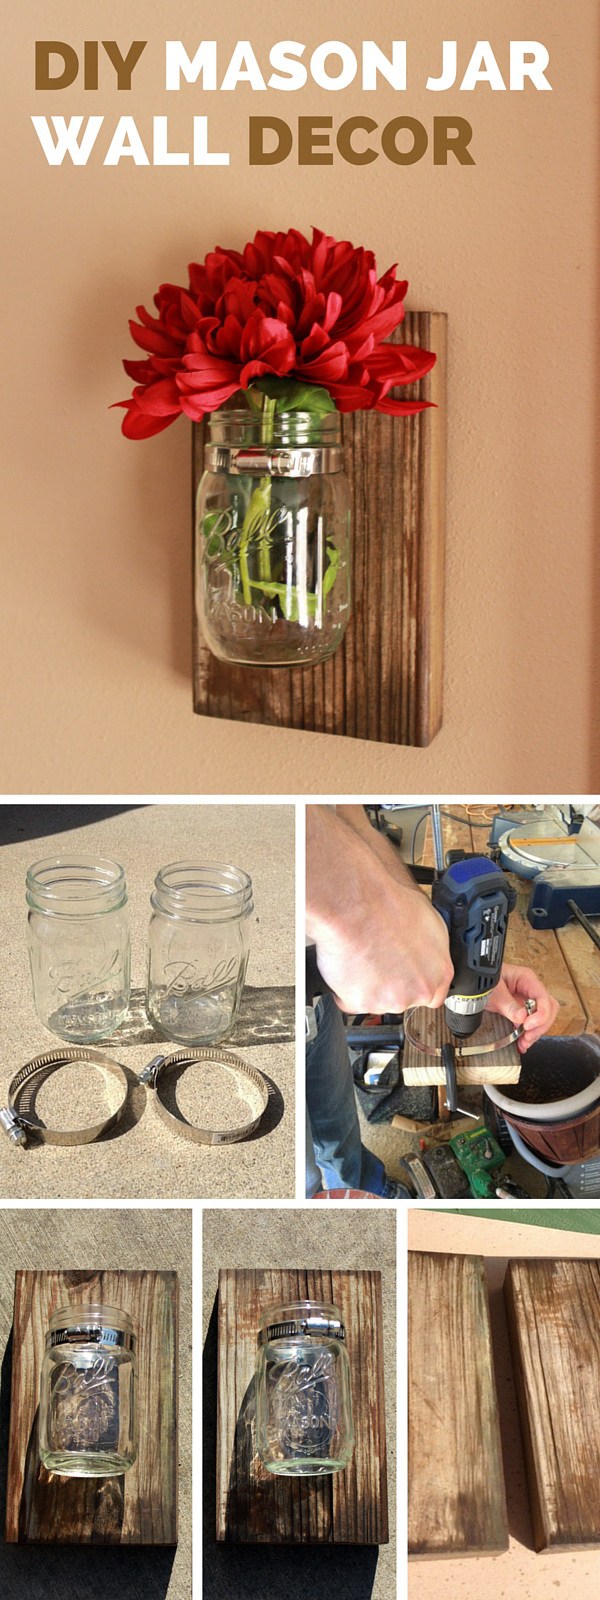 DIY Mason Jar Wall Decorations: Get creative decorating your walls. Fixing mason jars with a piece of fresh flower to the wall and  add a nice rustic accent to your decor. 